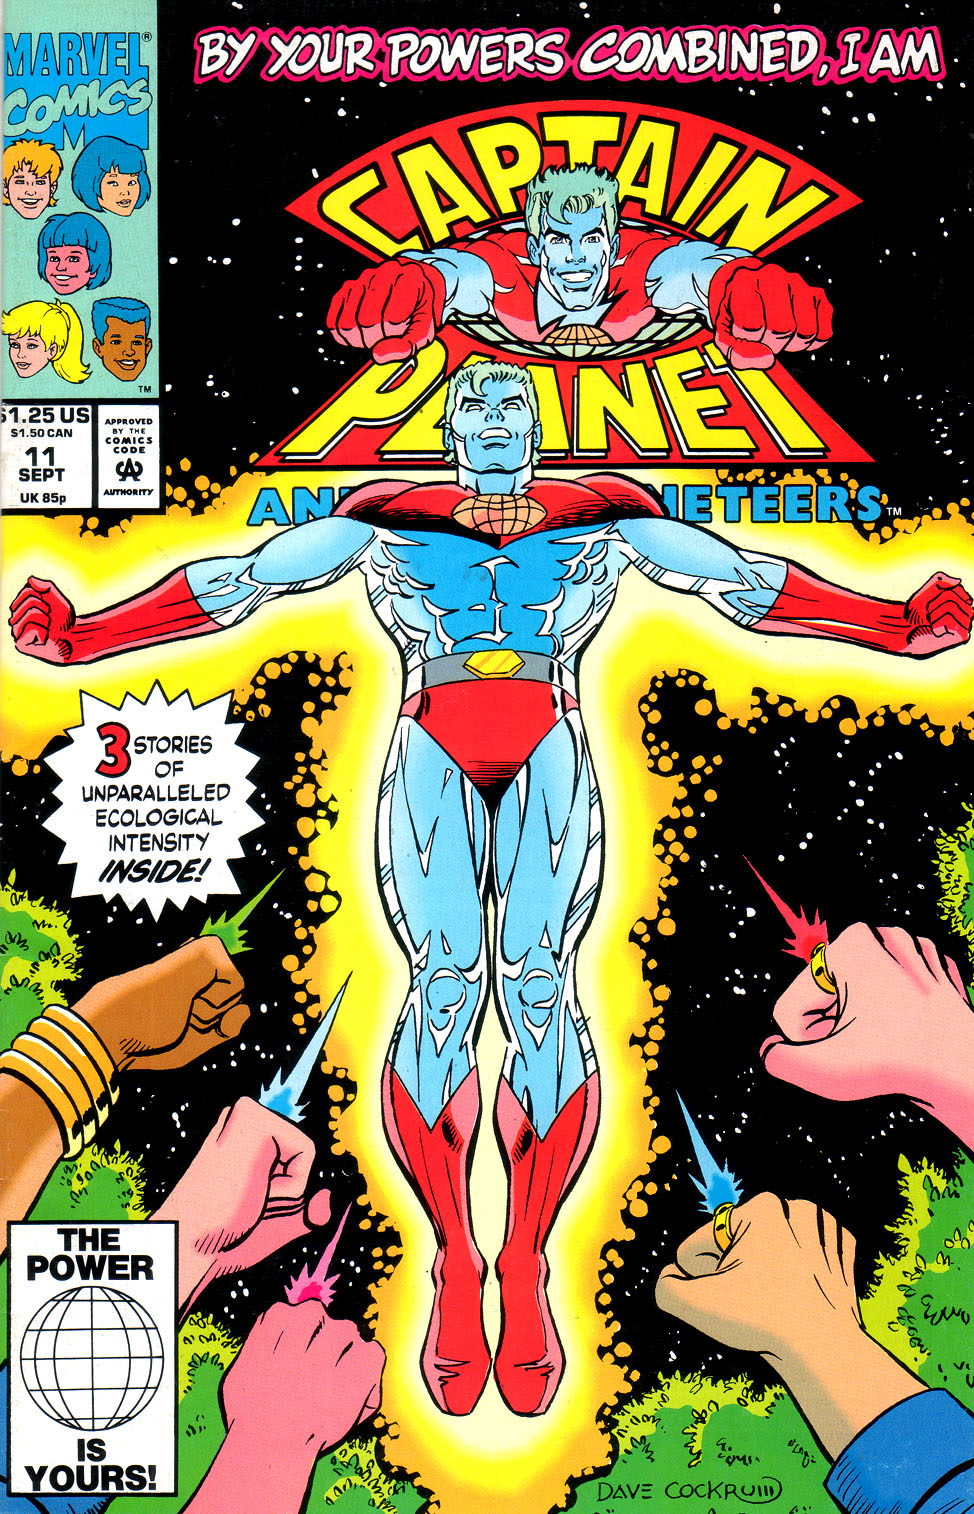 Captain Planet And The Planeteers Issue 11 | Read Captain Planet And The  Planeteers Issue 11 comic online in high quality. Read Full Comic online  for free - Read comics online in high quality .